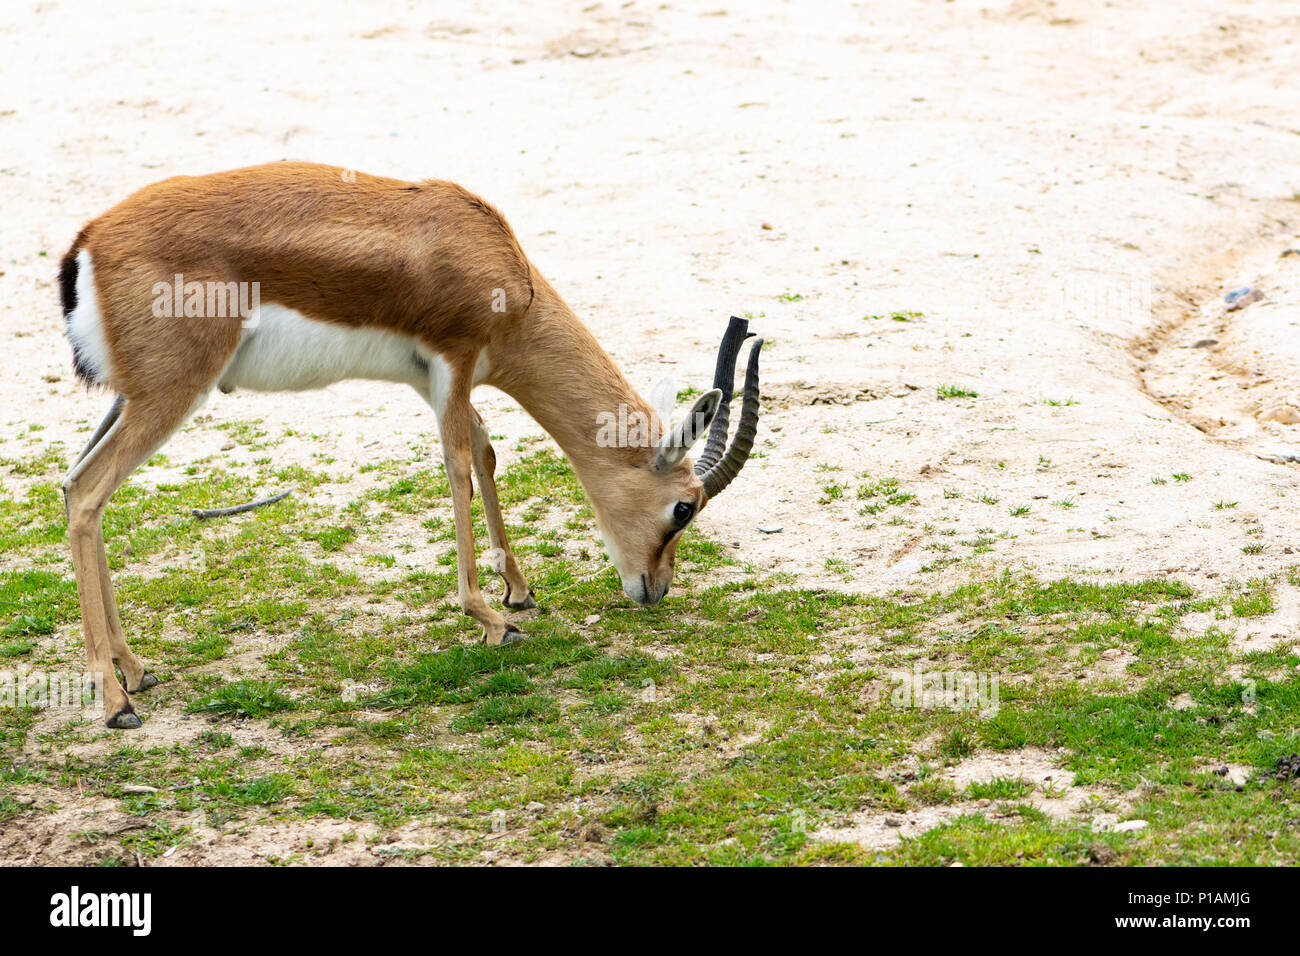 Dorcas gazelle grazing on sparse grass in Madrid Zoo, Spain Stock Photo